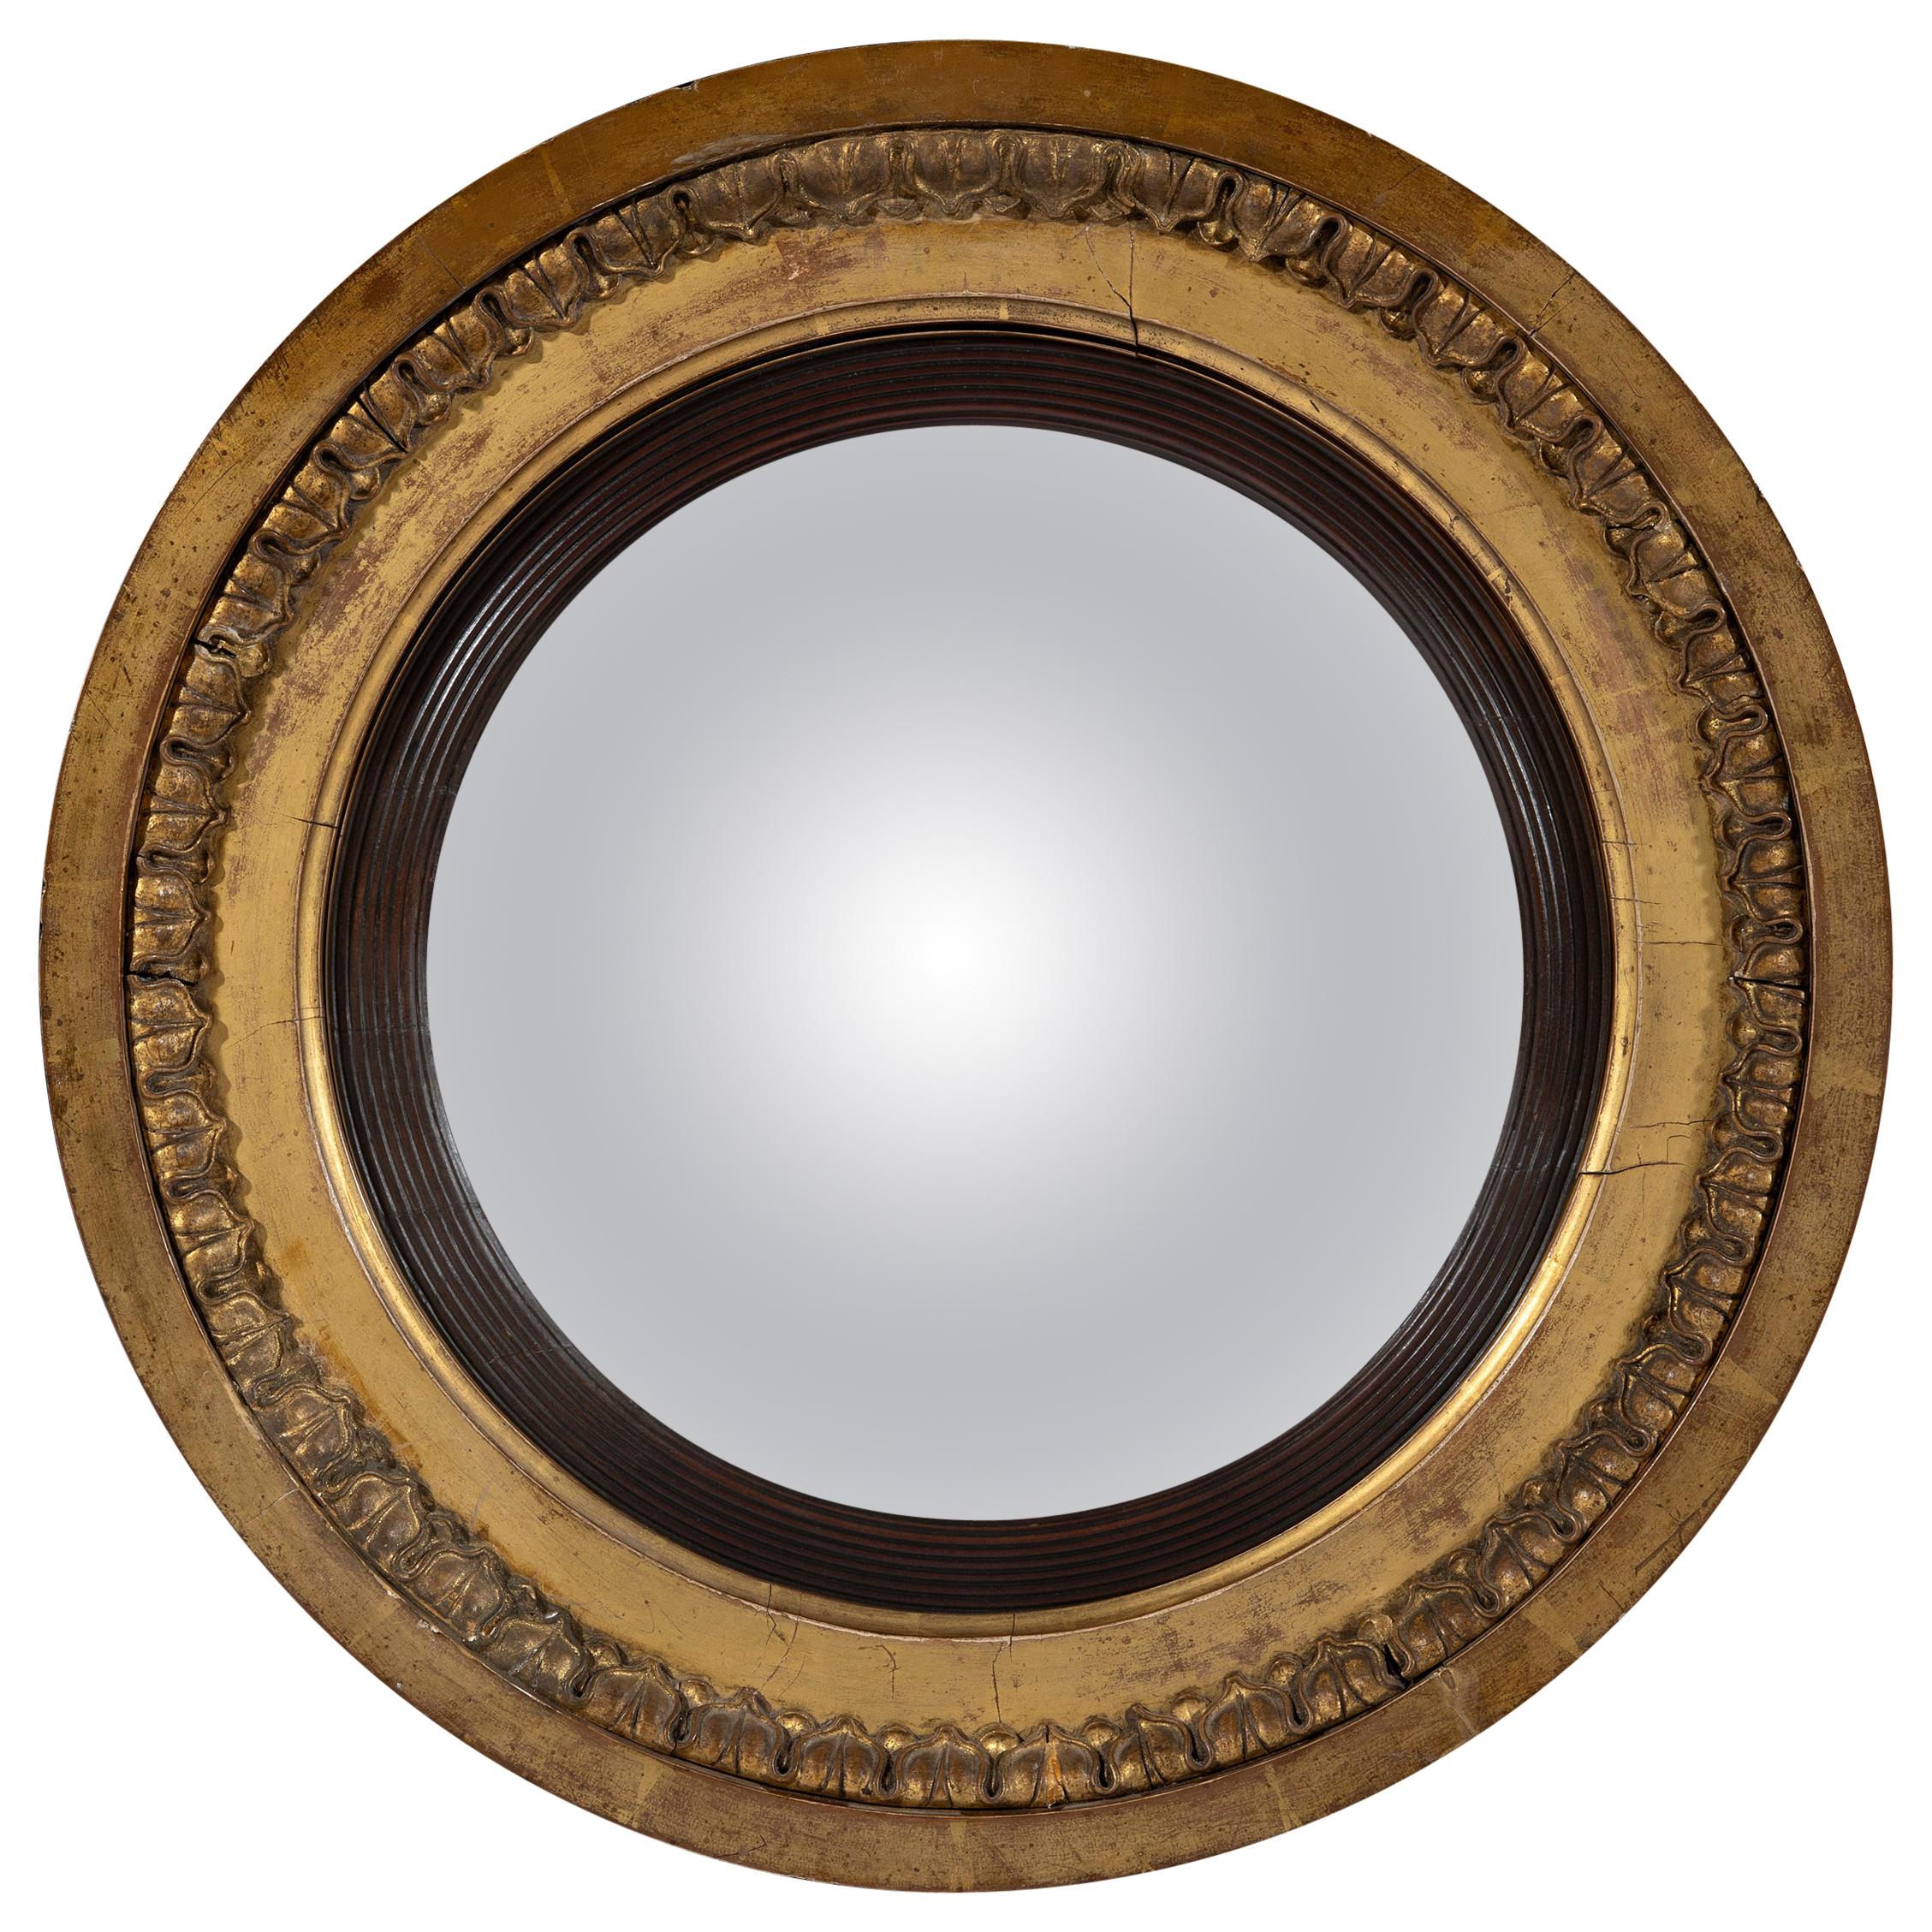 Late Georgian Regency Period Carved Giltwood Convex Mirror For Sale